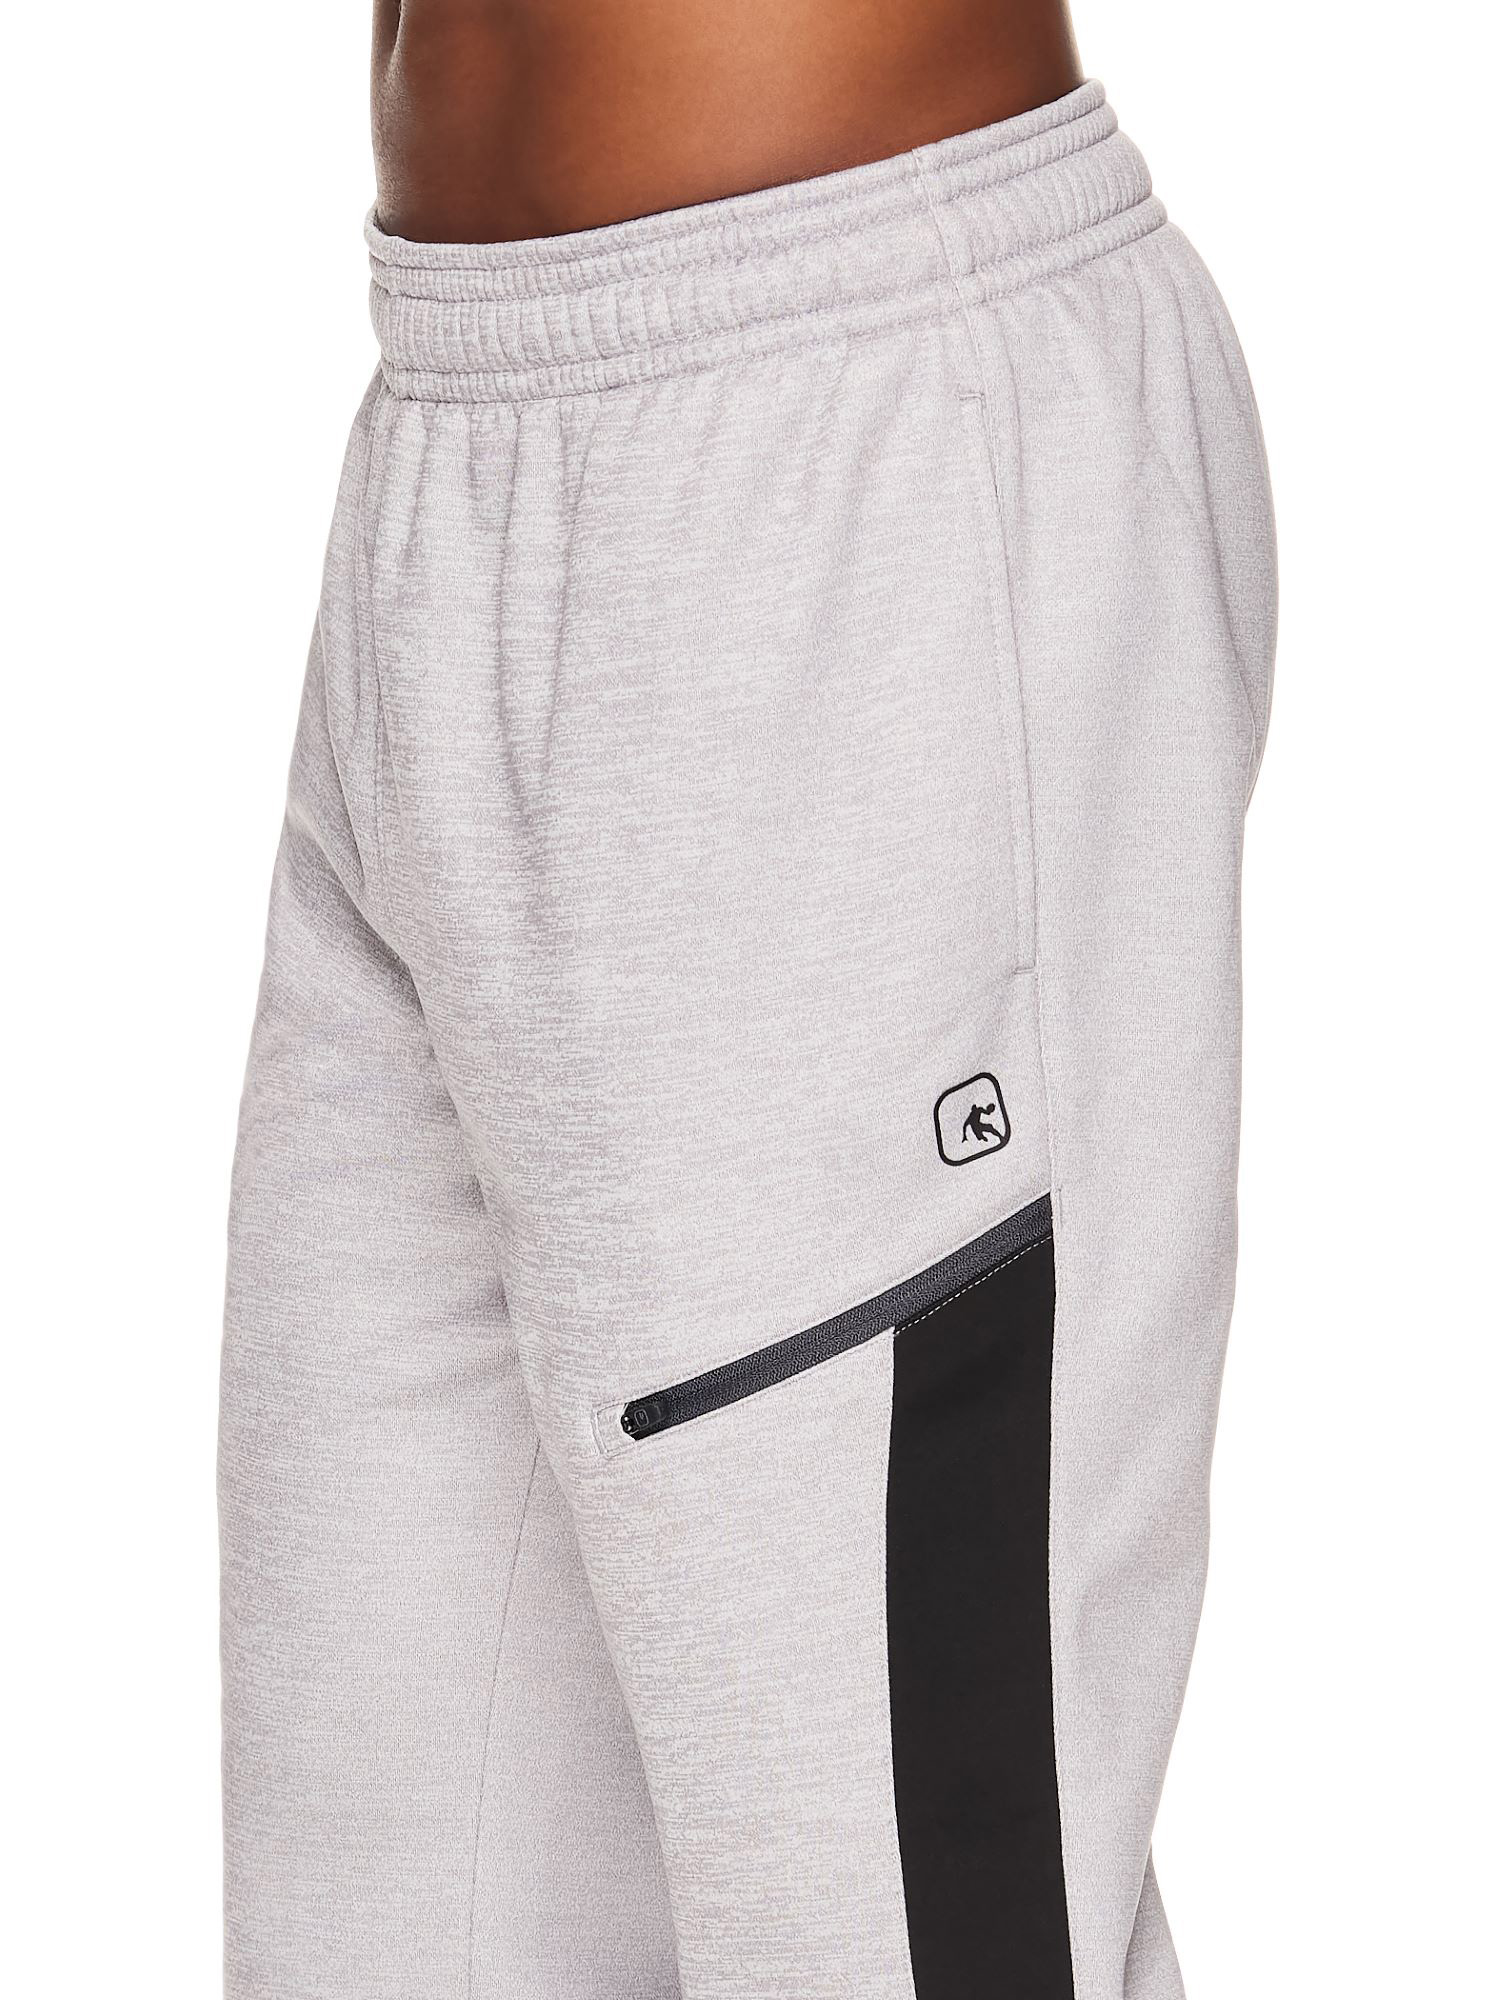 And1 Men's and Big Men's Deflection Pants, Sizes S-5X - image 4 of 4